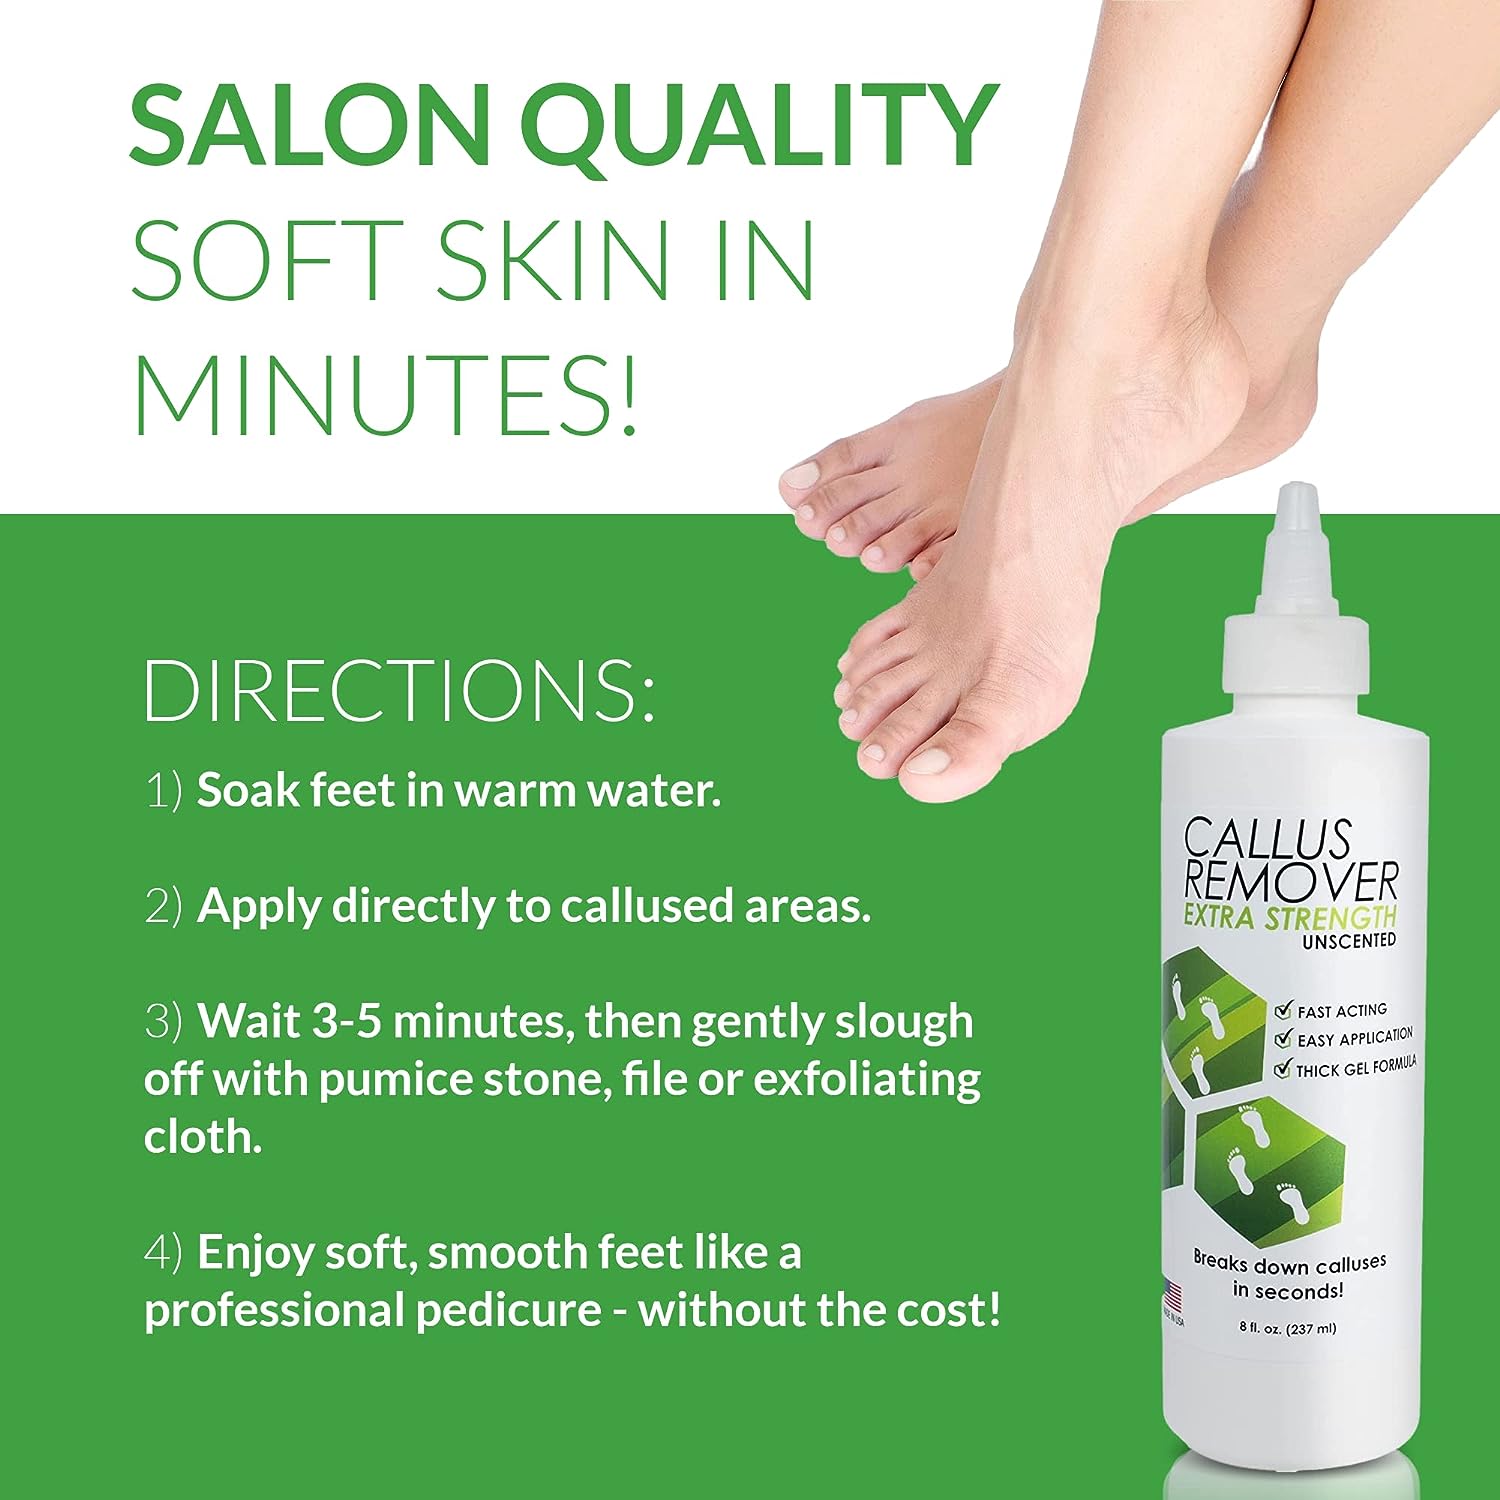 Unscented Callus Remover Gel, Extra Strength